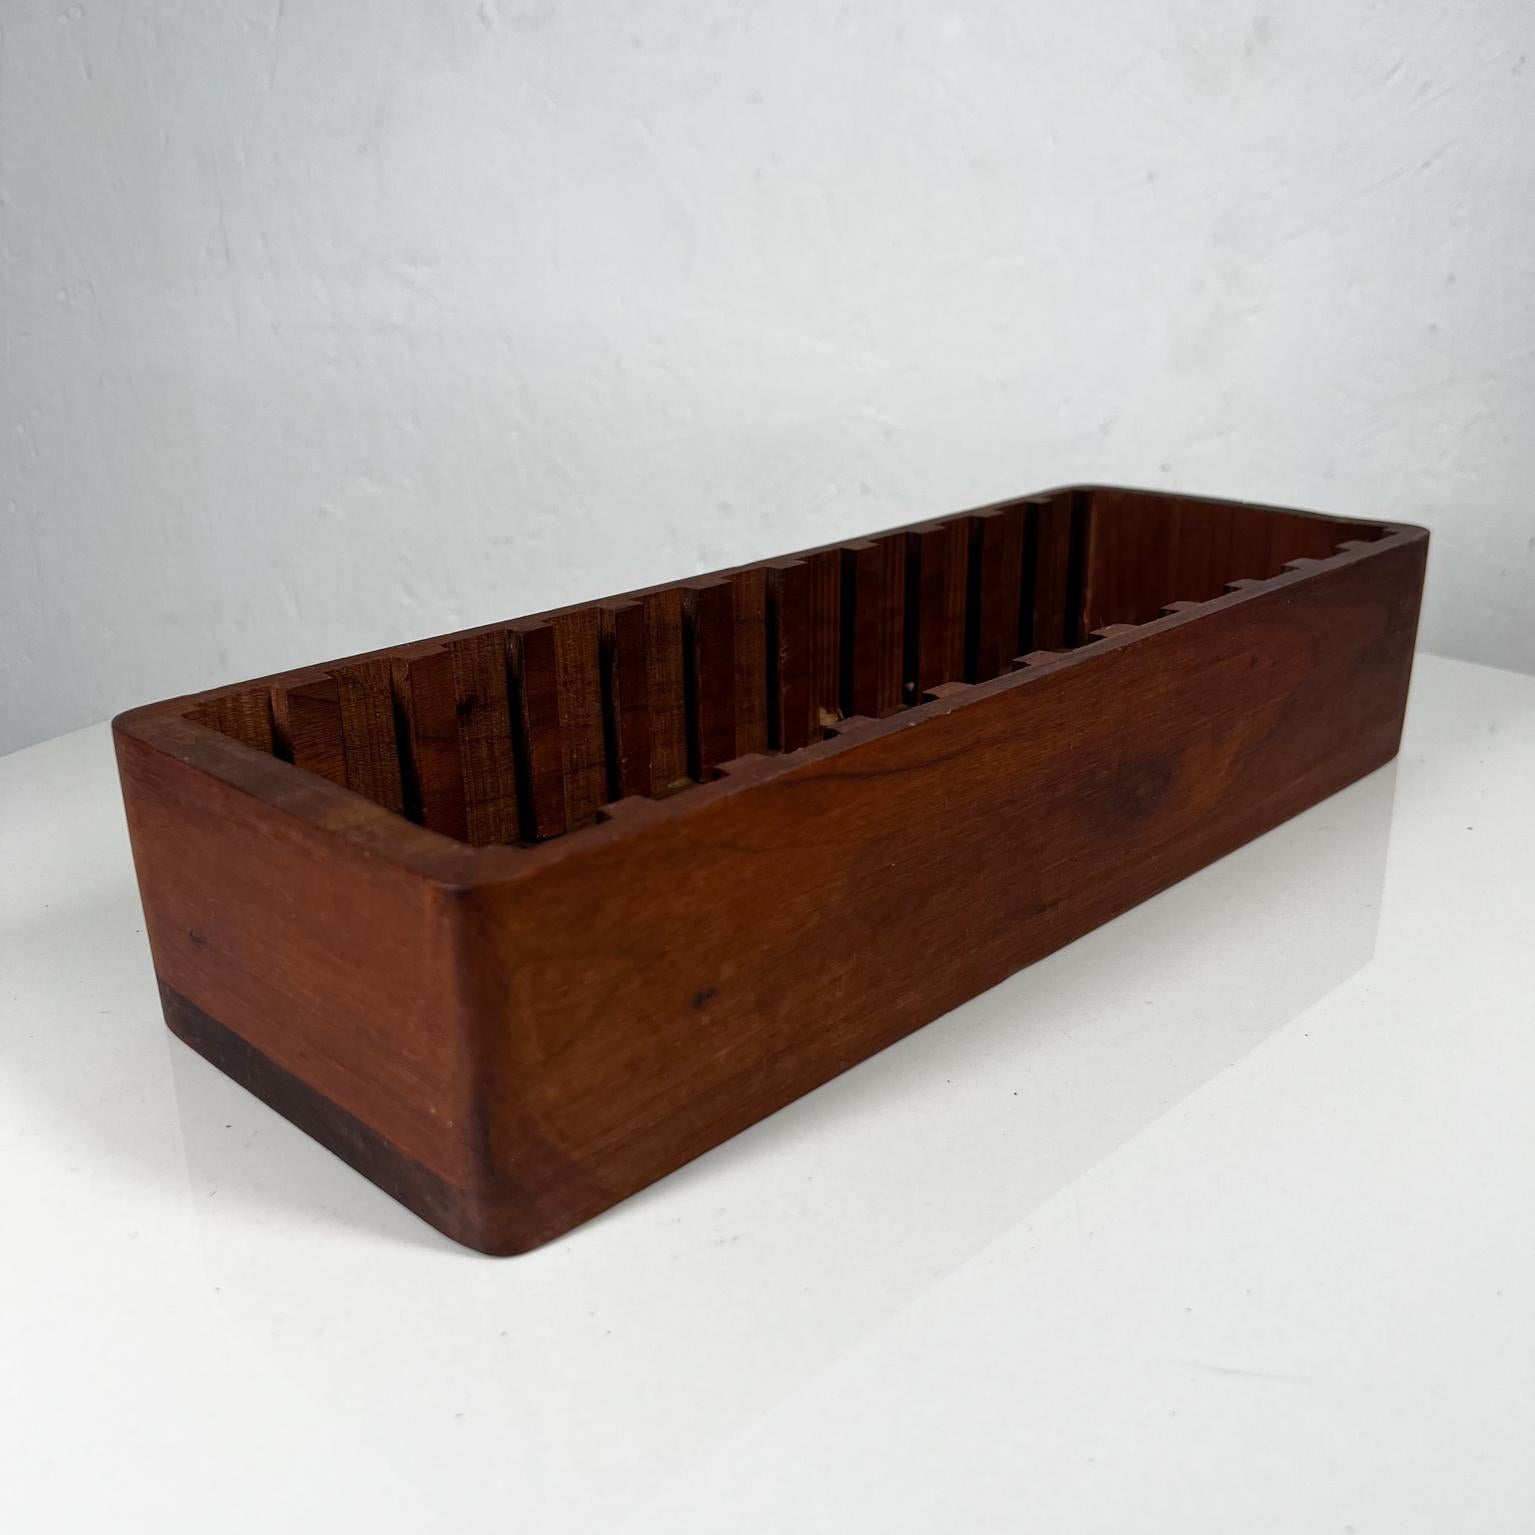 1970s Modern walnut wood eleven cassette holder storage box
Measures: 13.25 w x 4.88 t x 2.63 d
Preowned vintage condition.
See images provided.